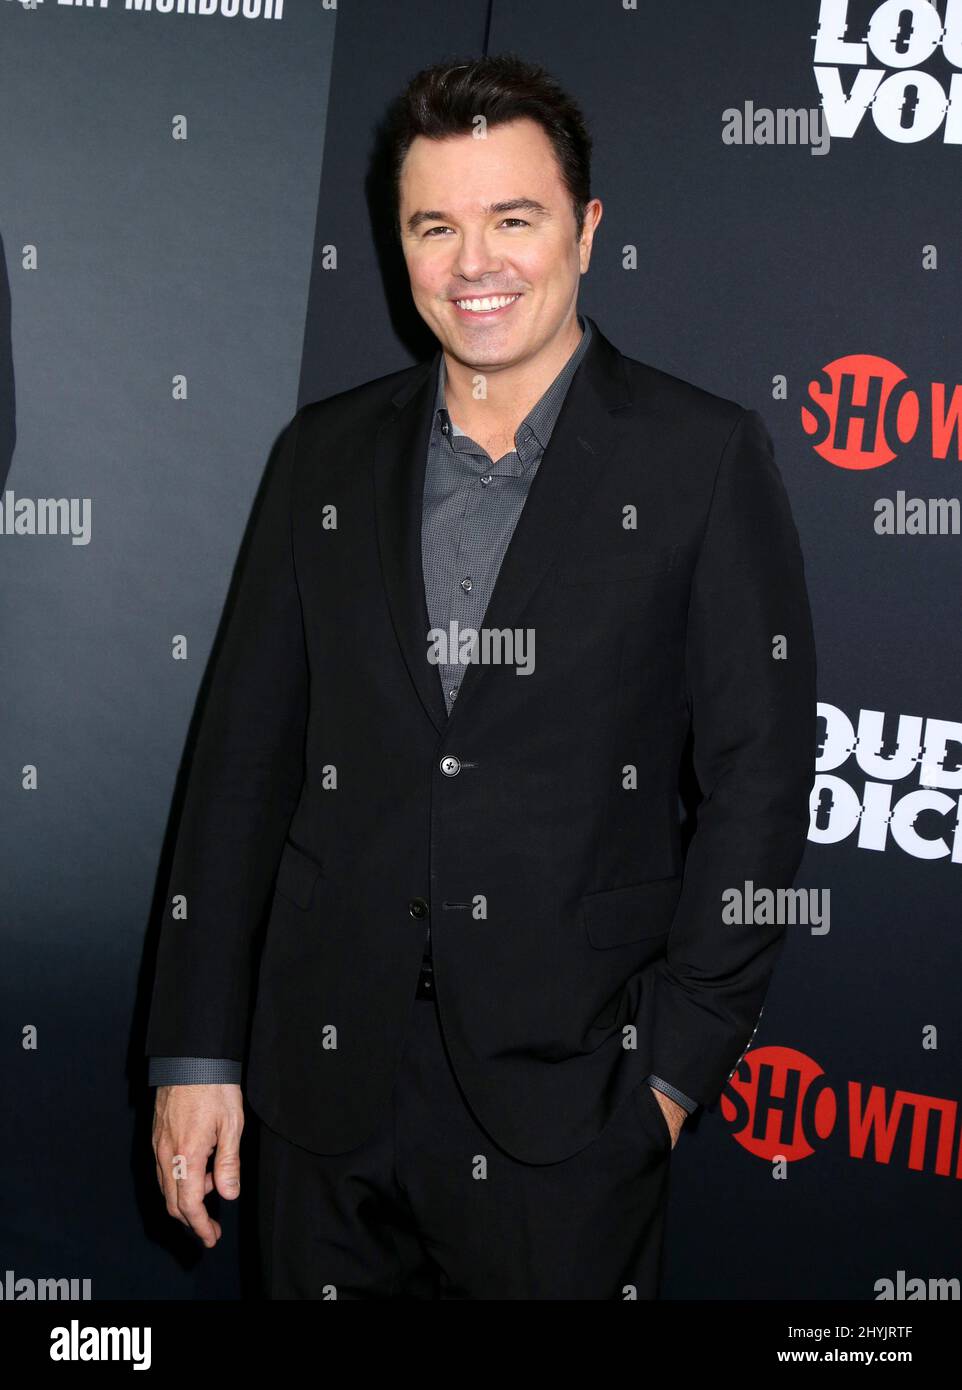 Seth MacFarlane attending 'The Loudest Voice' Premiere held at The Paris Theatre on June 24, 2019 in New York City, NY Stock Photo